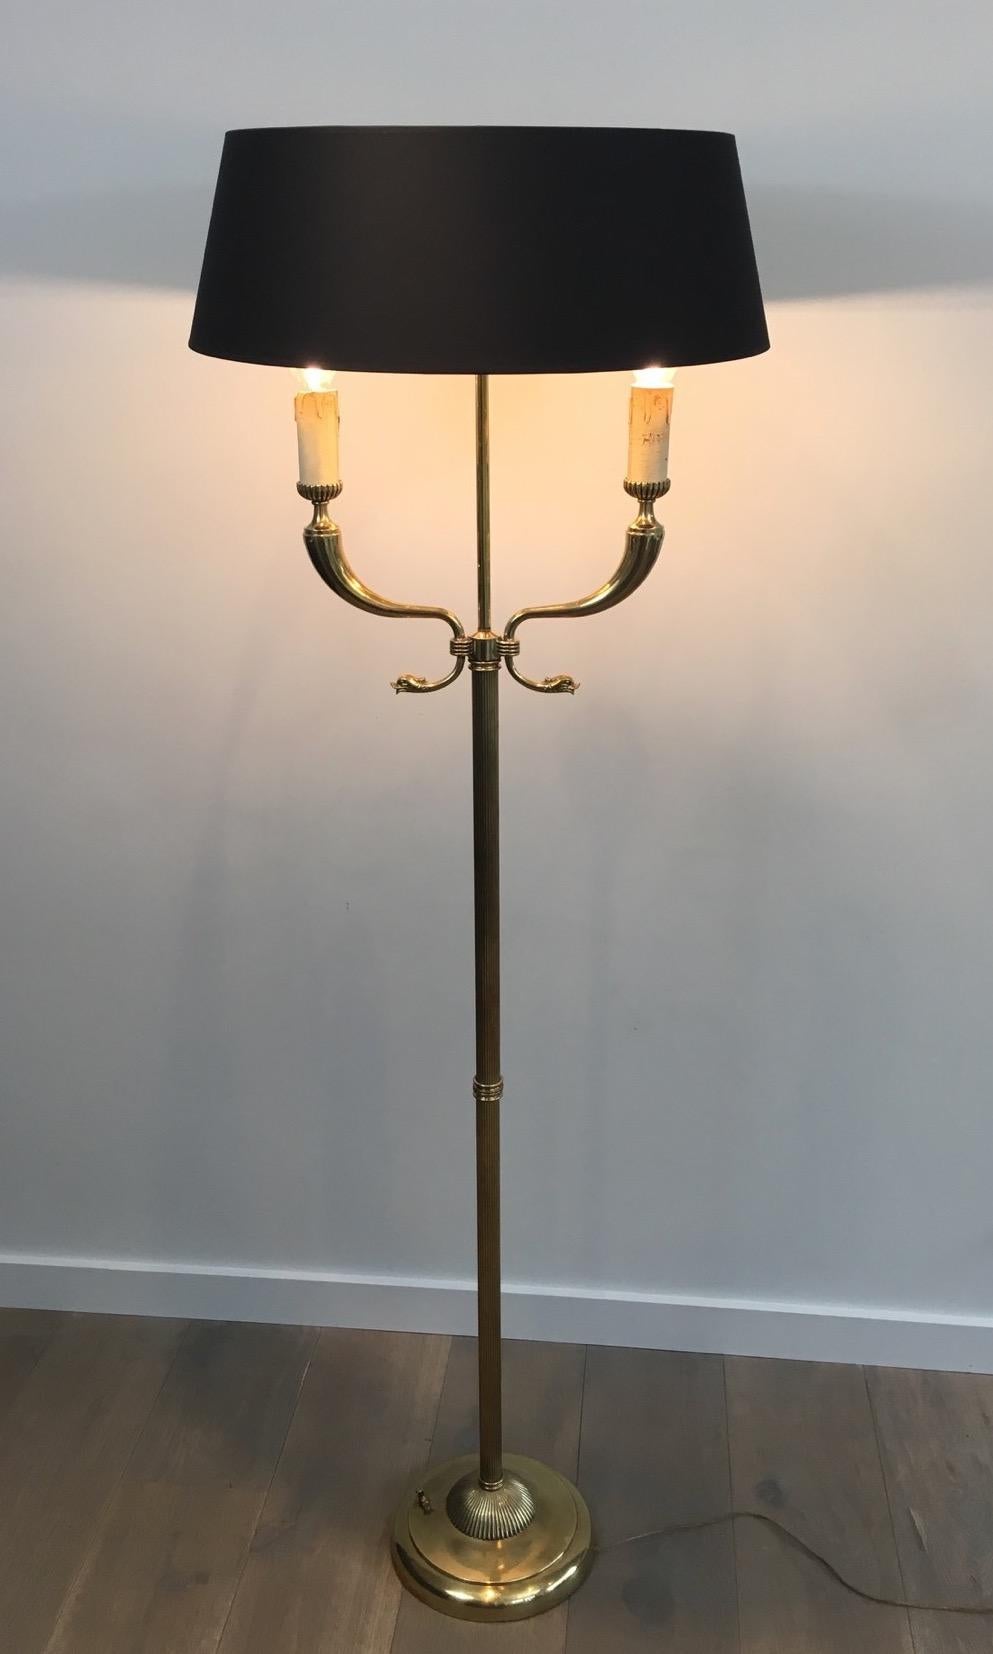 This very elegant neoclassical floor lamp with dolfin heads is made of brass. This is a French work, attributed to famous French design Maison Jansen, circa 1960.